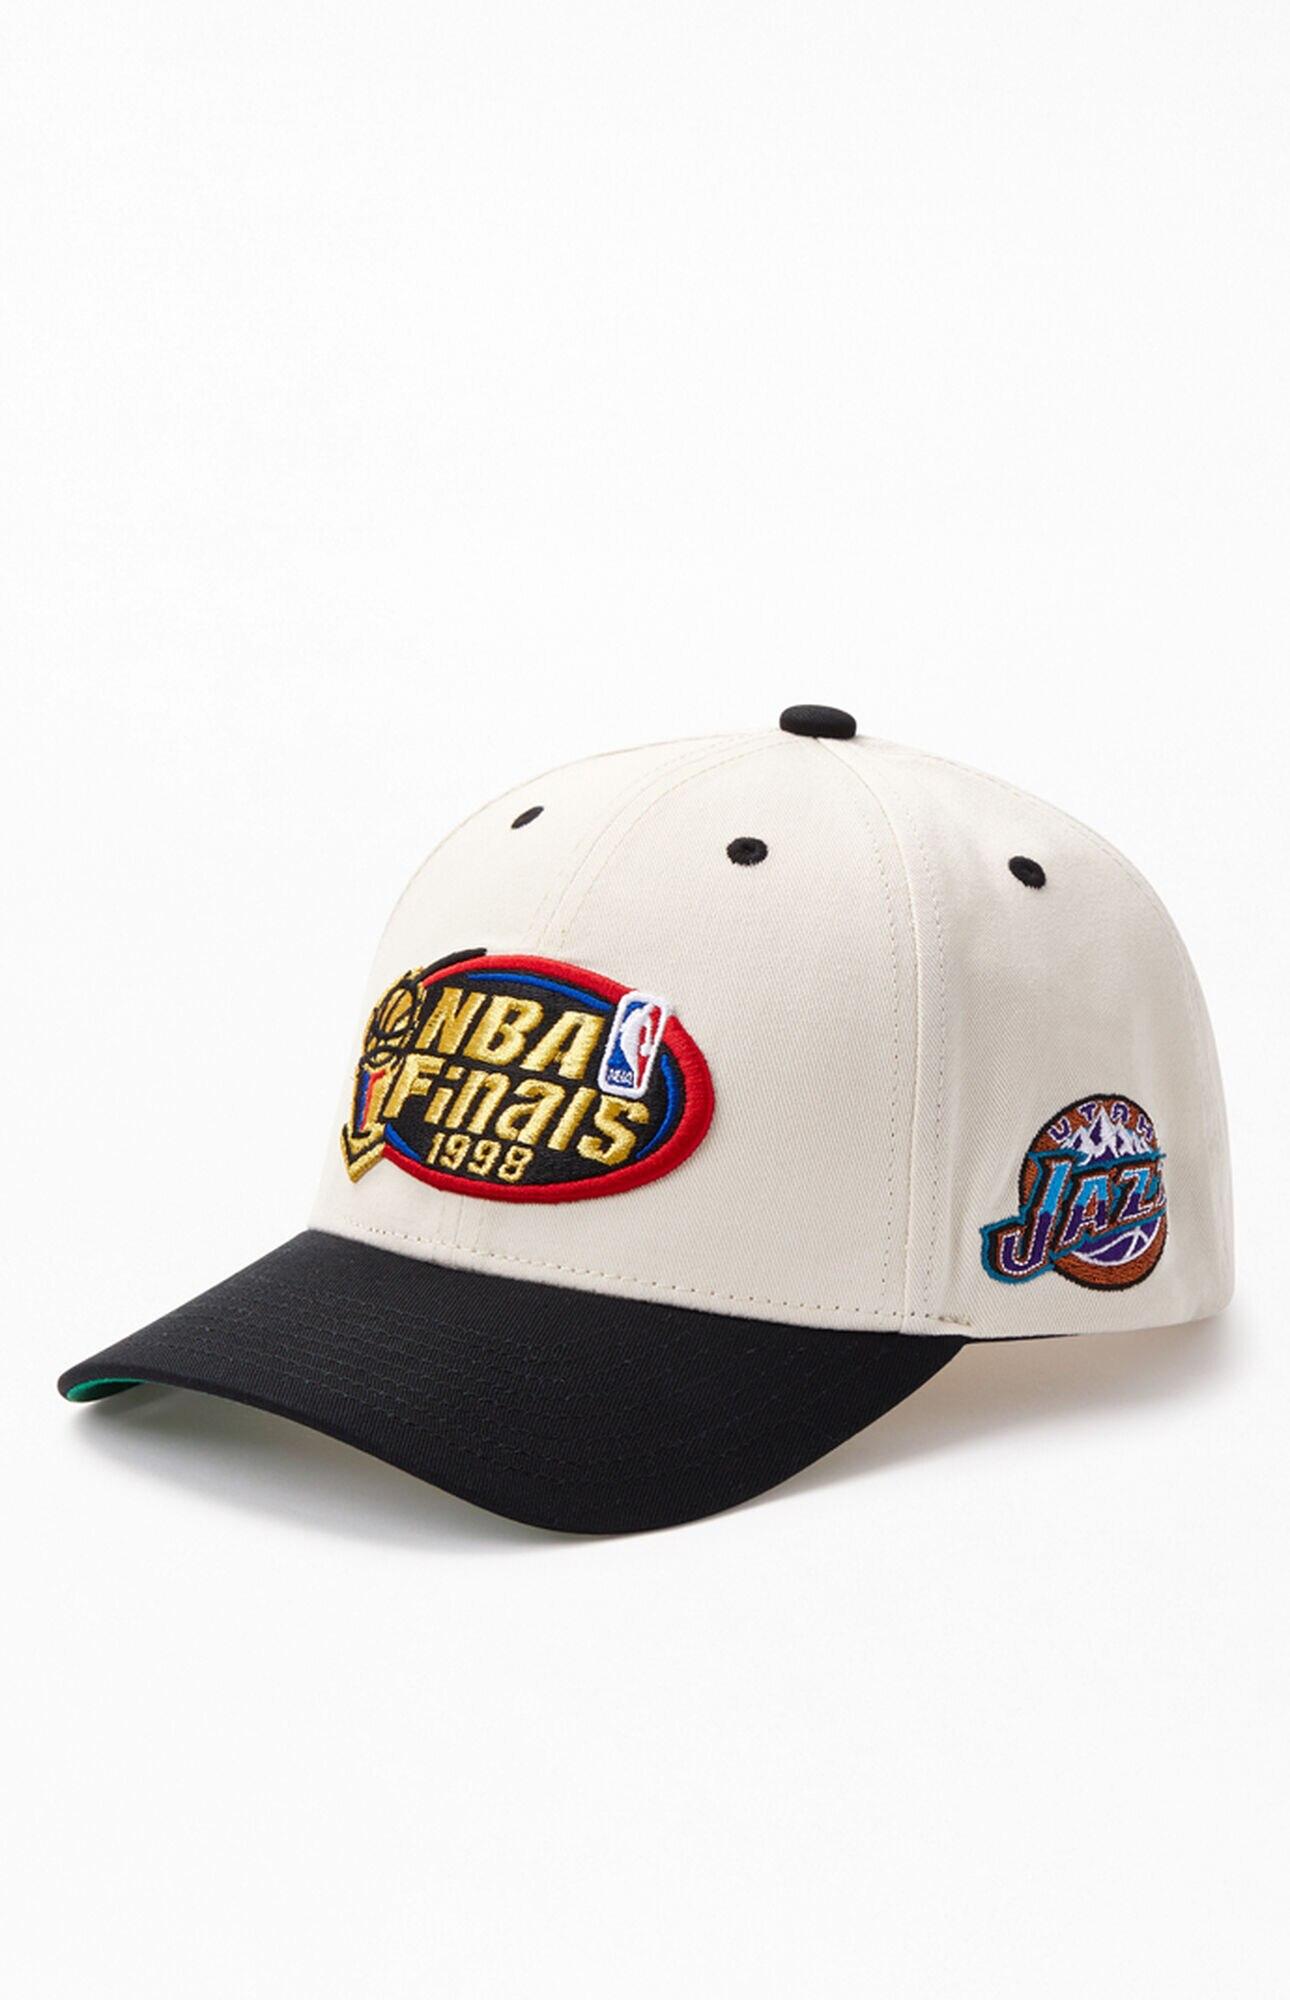 Mitchell & Ness 1998 Nba Finals Snapback Hat in White,Black (Black) for Men  - Lyst